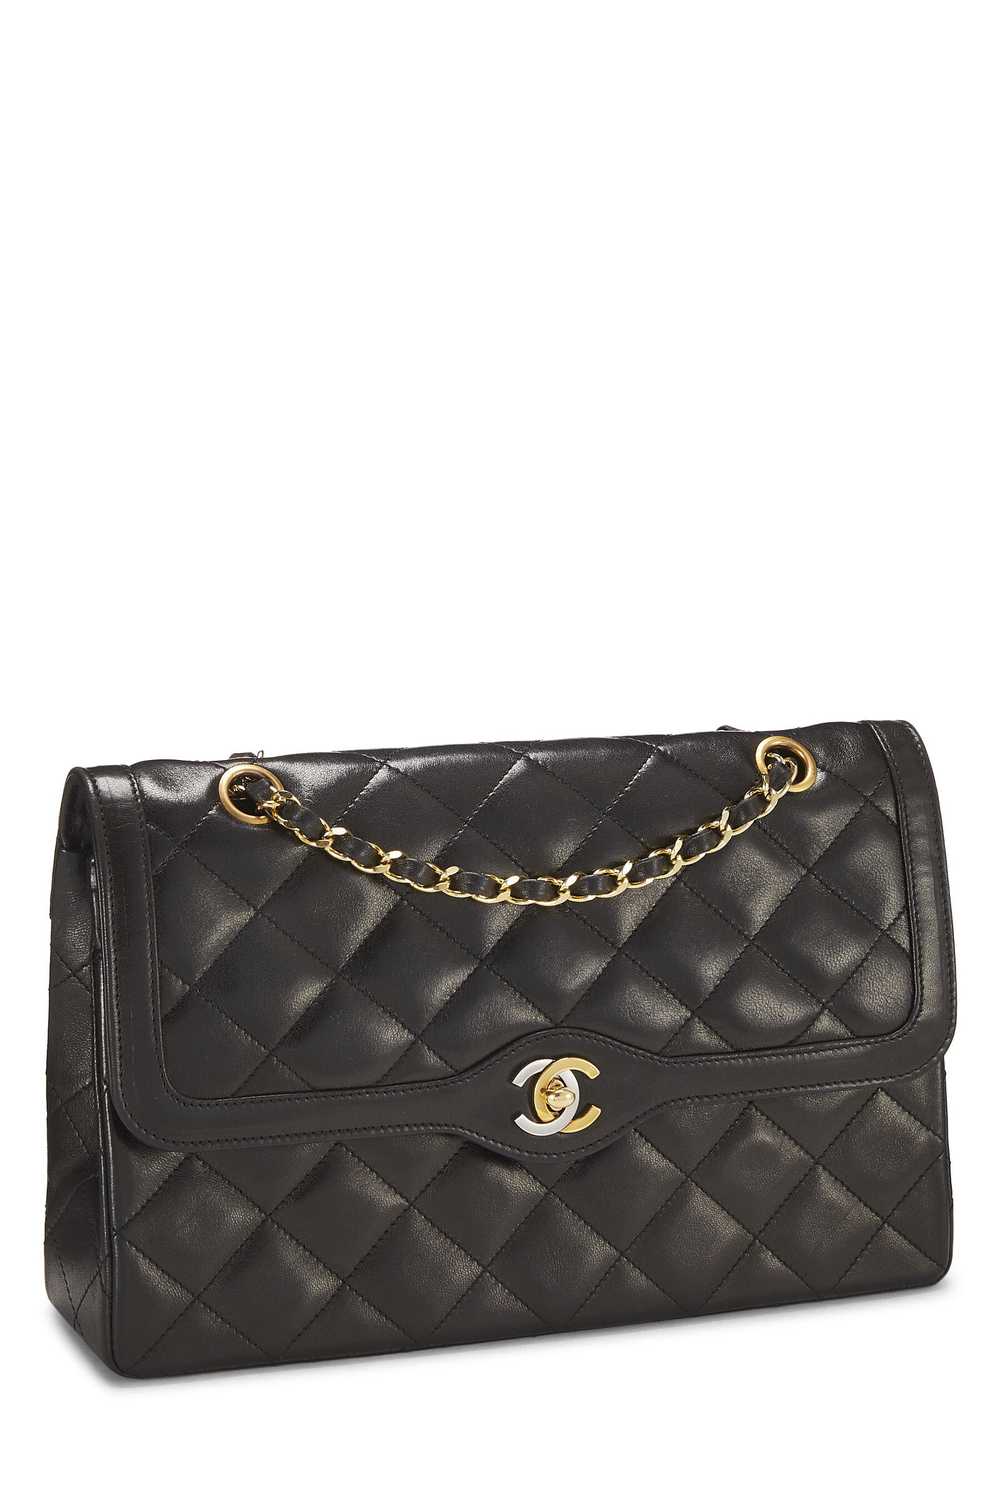 Black Quilted Lambskin Paris Limited Double Flap … - image 2